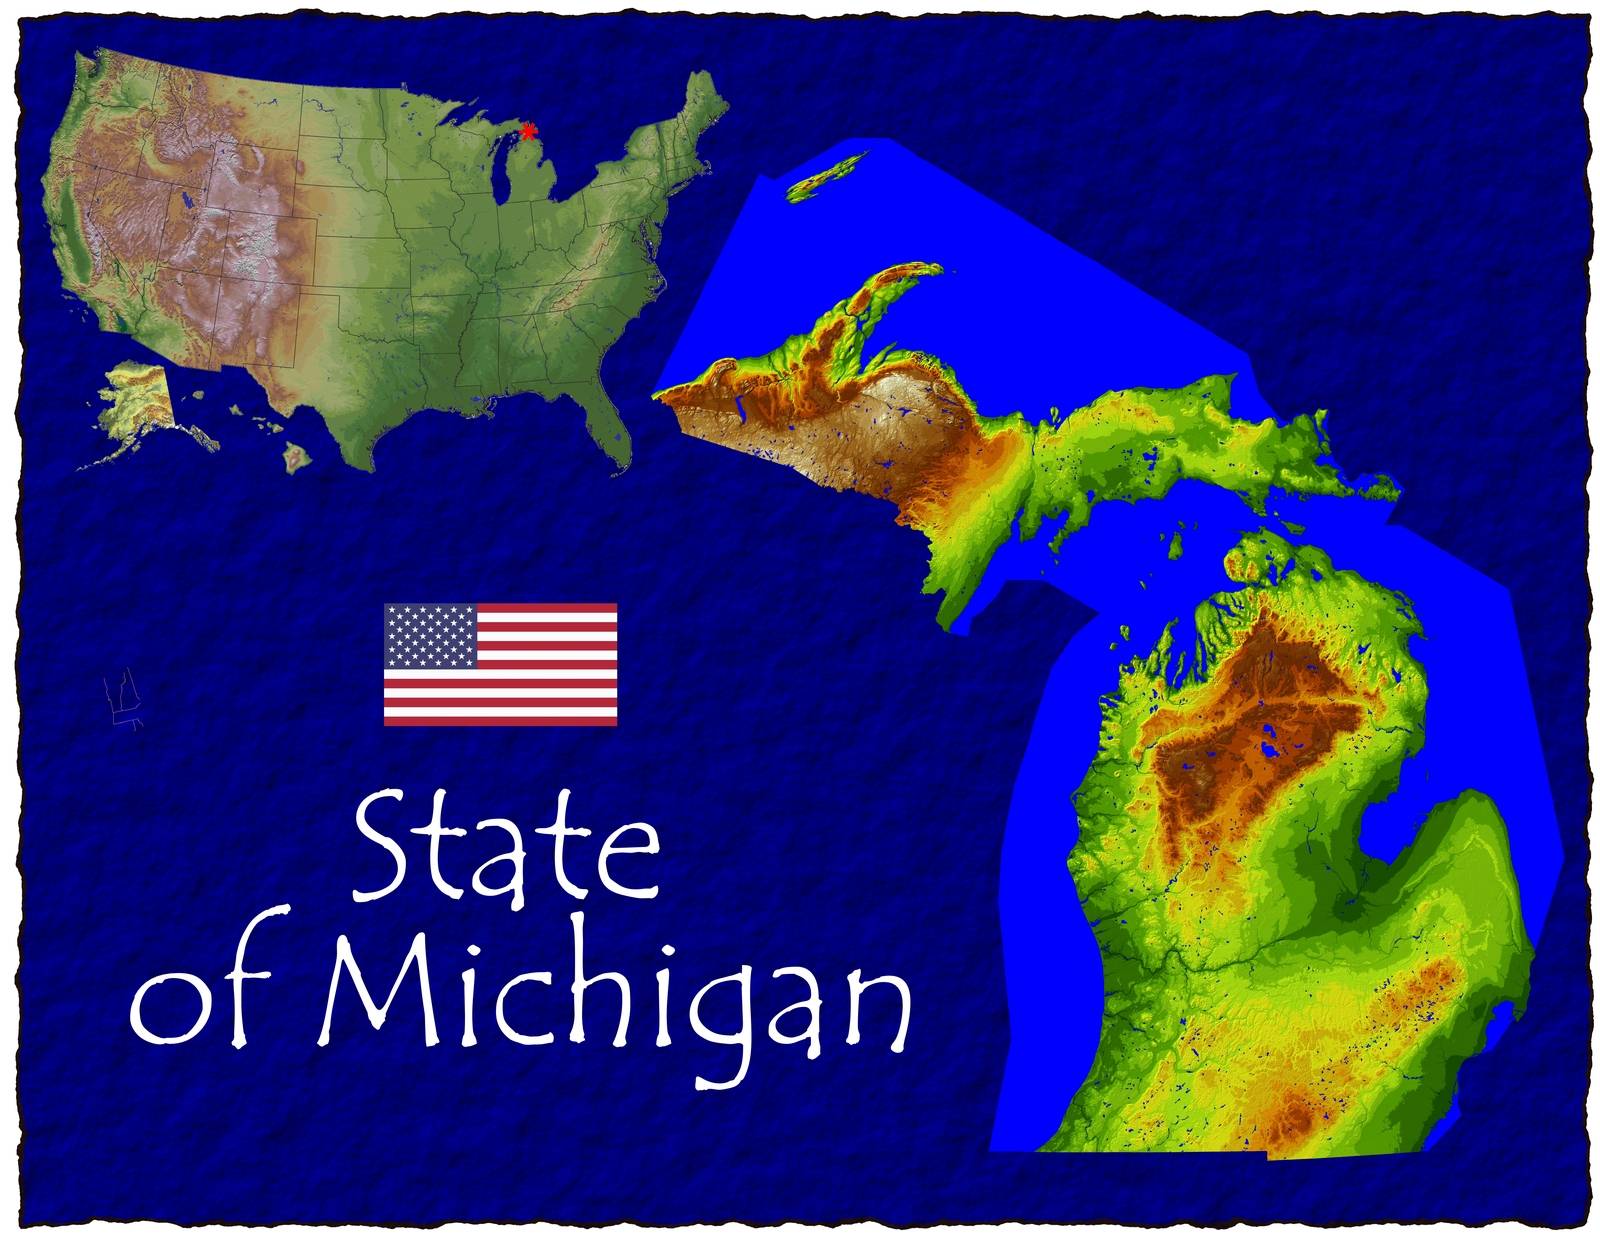 State of Michigan by JRTBurr